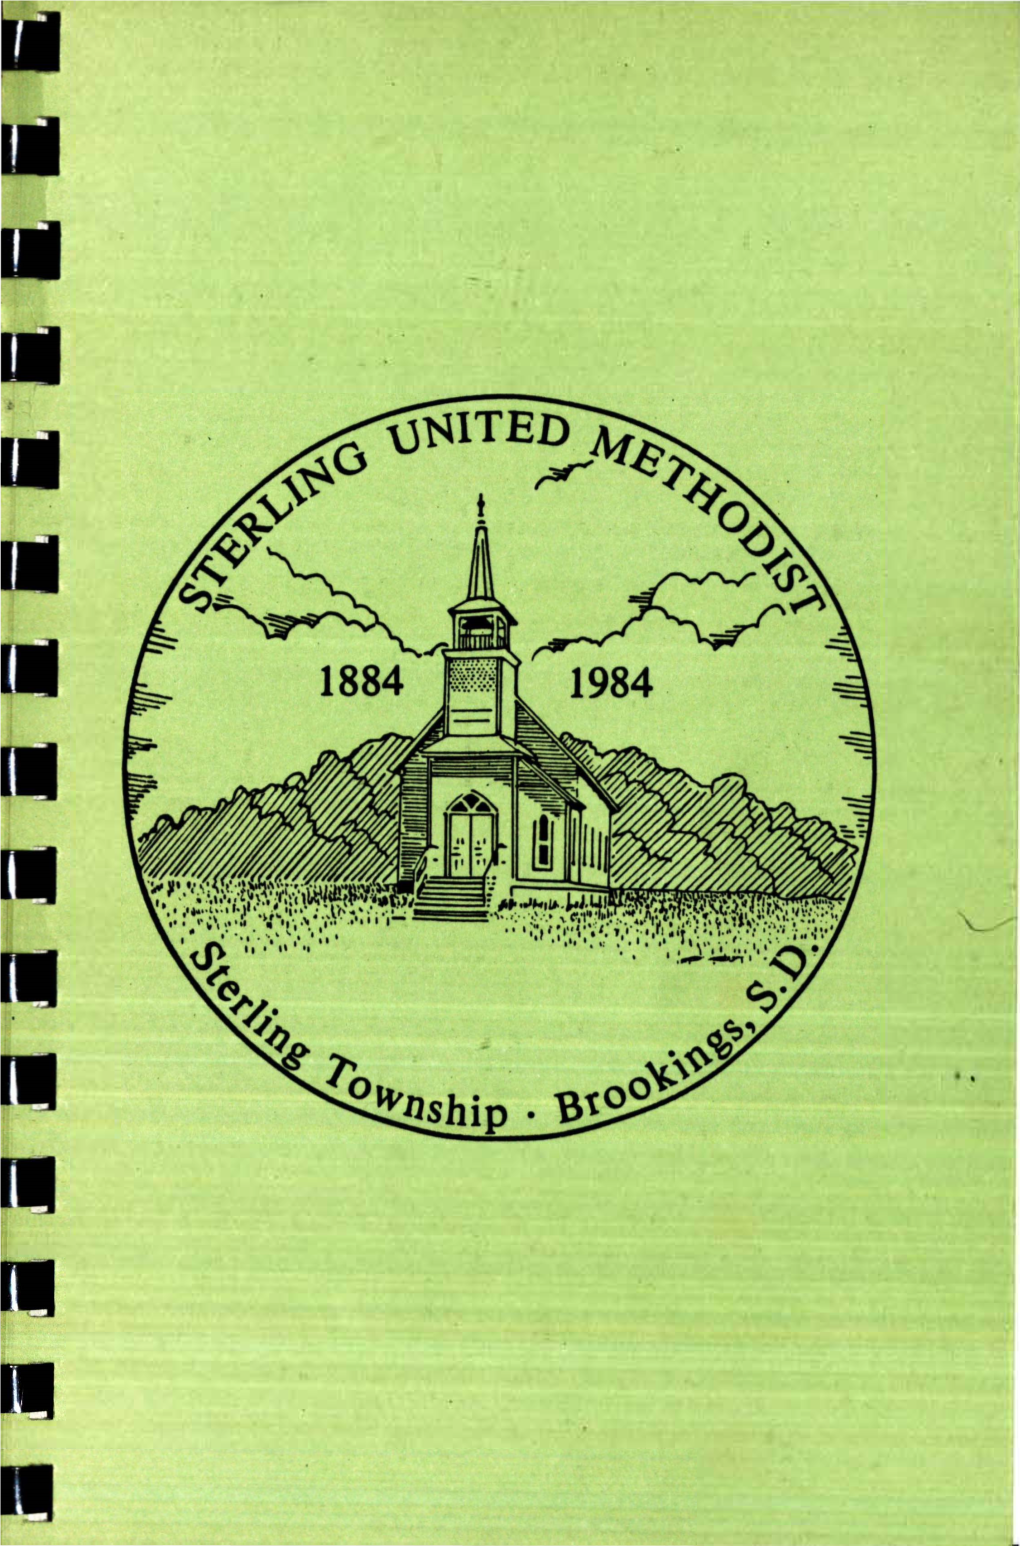 Sterling United Methodist, 1884-1984, Sterling Township, Brookings, S.D